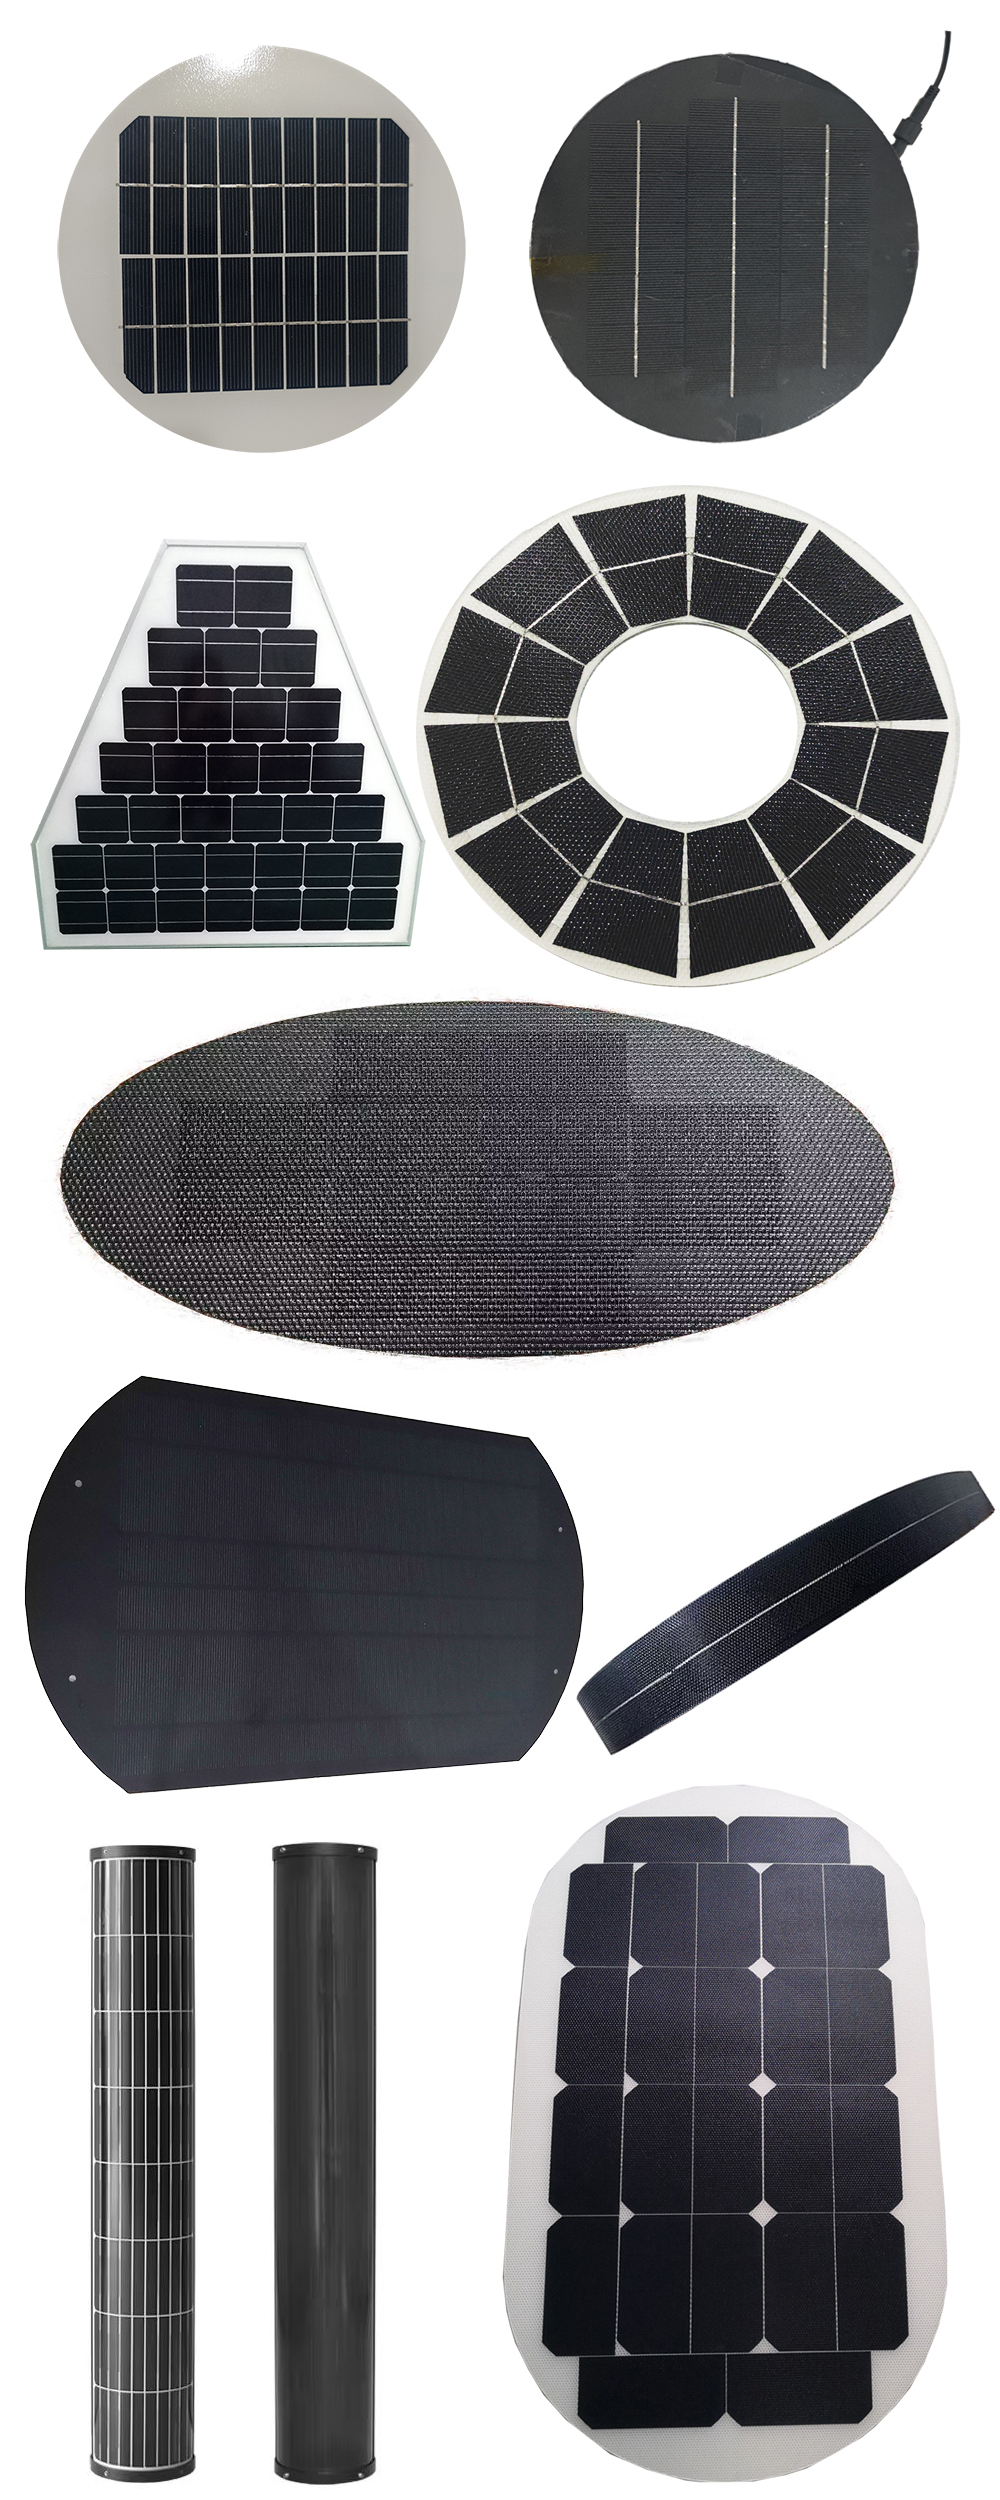 Customized shape and power solar panel example 